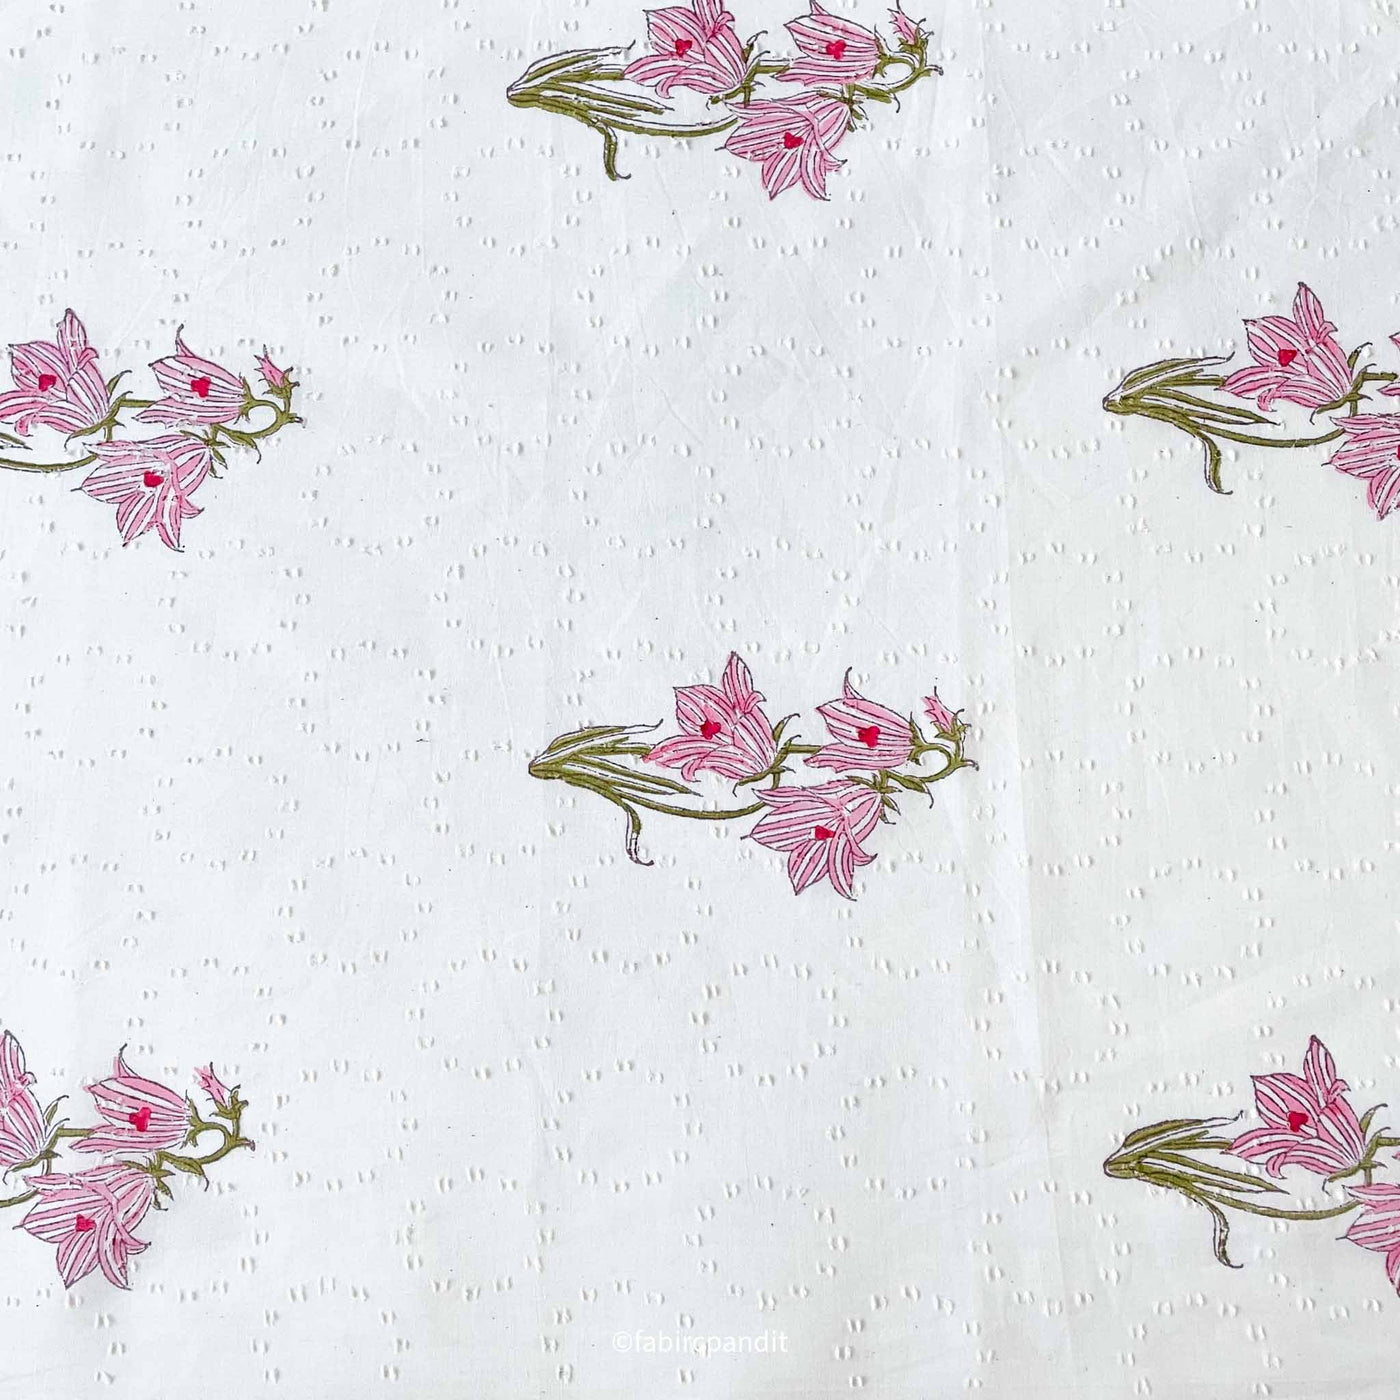 Fabric Pandit Cut Piece (CUT PIECE) Pink & White Dobby Carnations Hand Block Printed Pure Cotton Fabric (Width 44 inches)